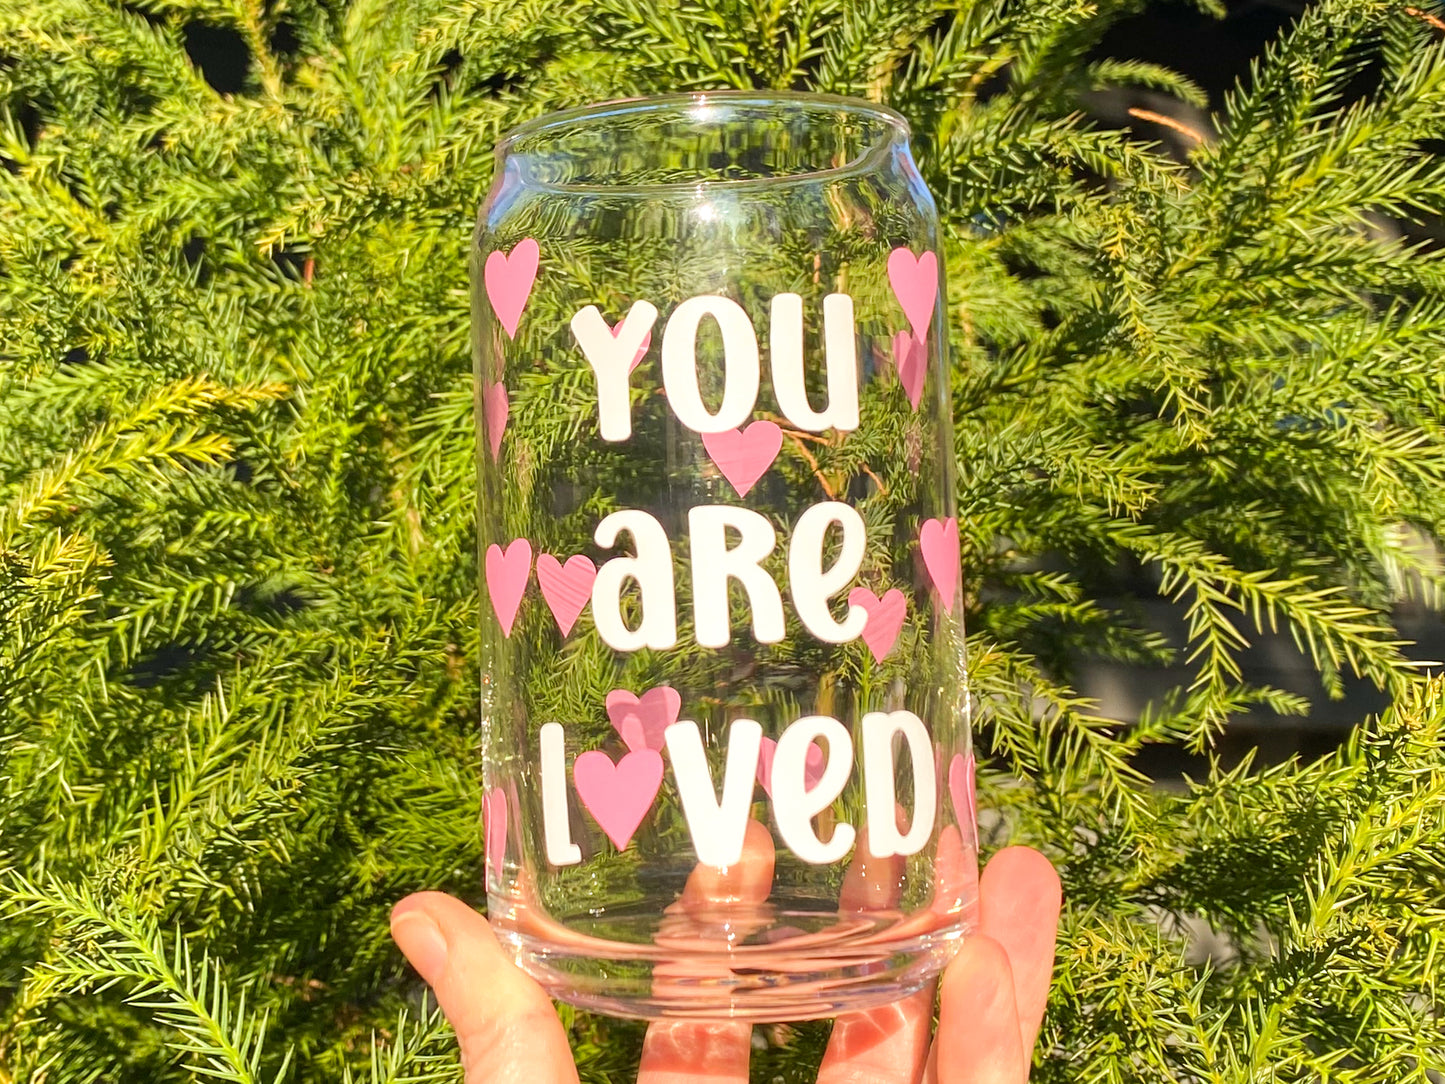 Galentines Day Hearts Glass Cup